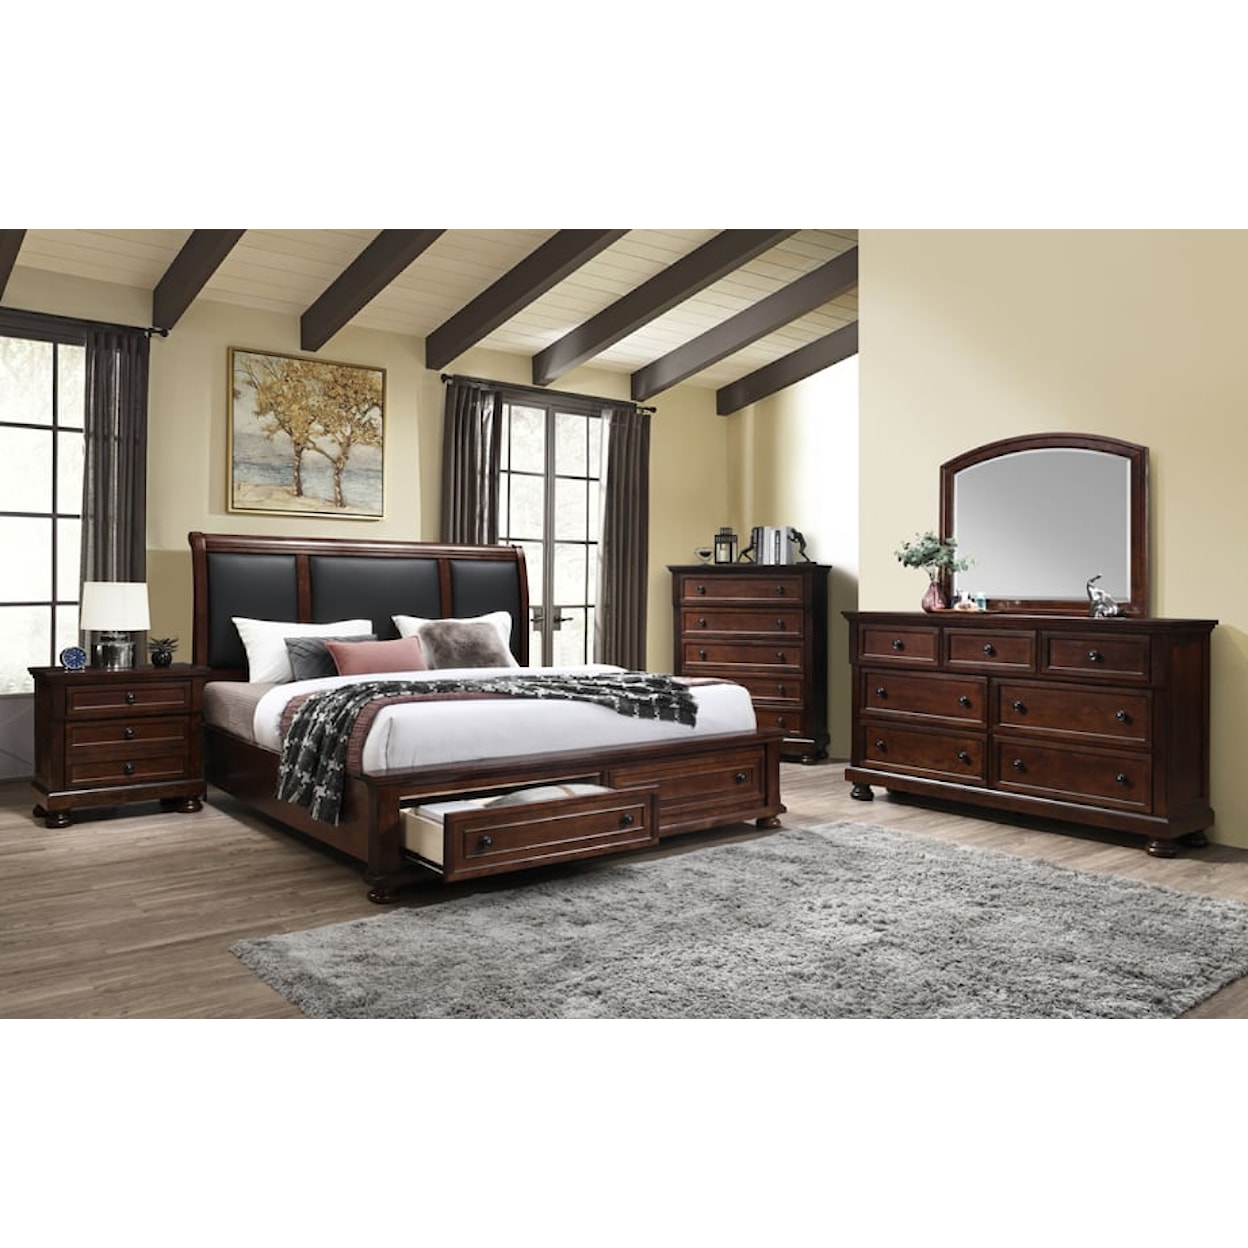 Flair Barlow Bedroom Chest